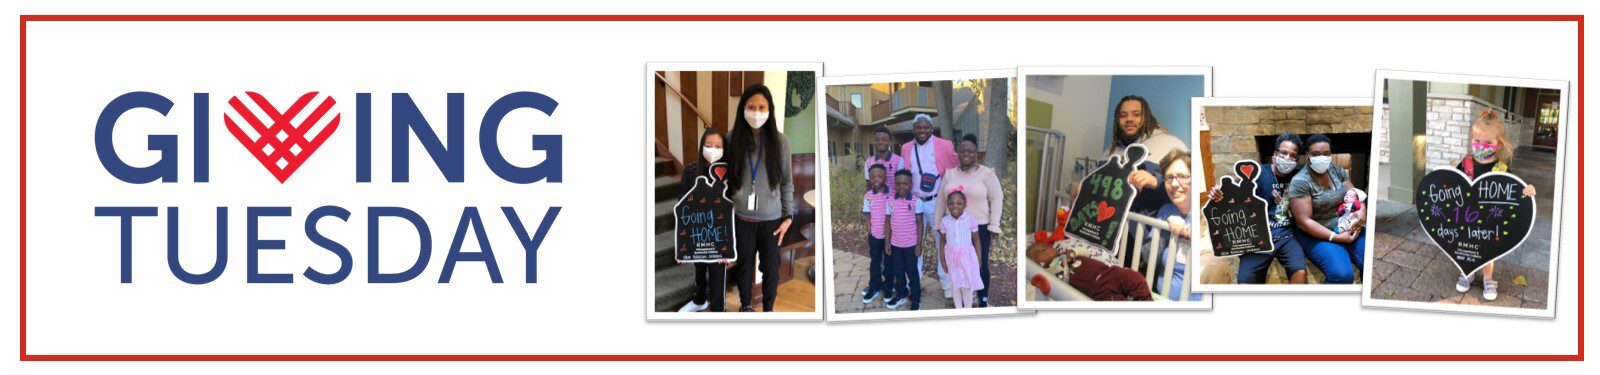 Giving Tuesday with photo collage of families holding "Going home!" signs